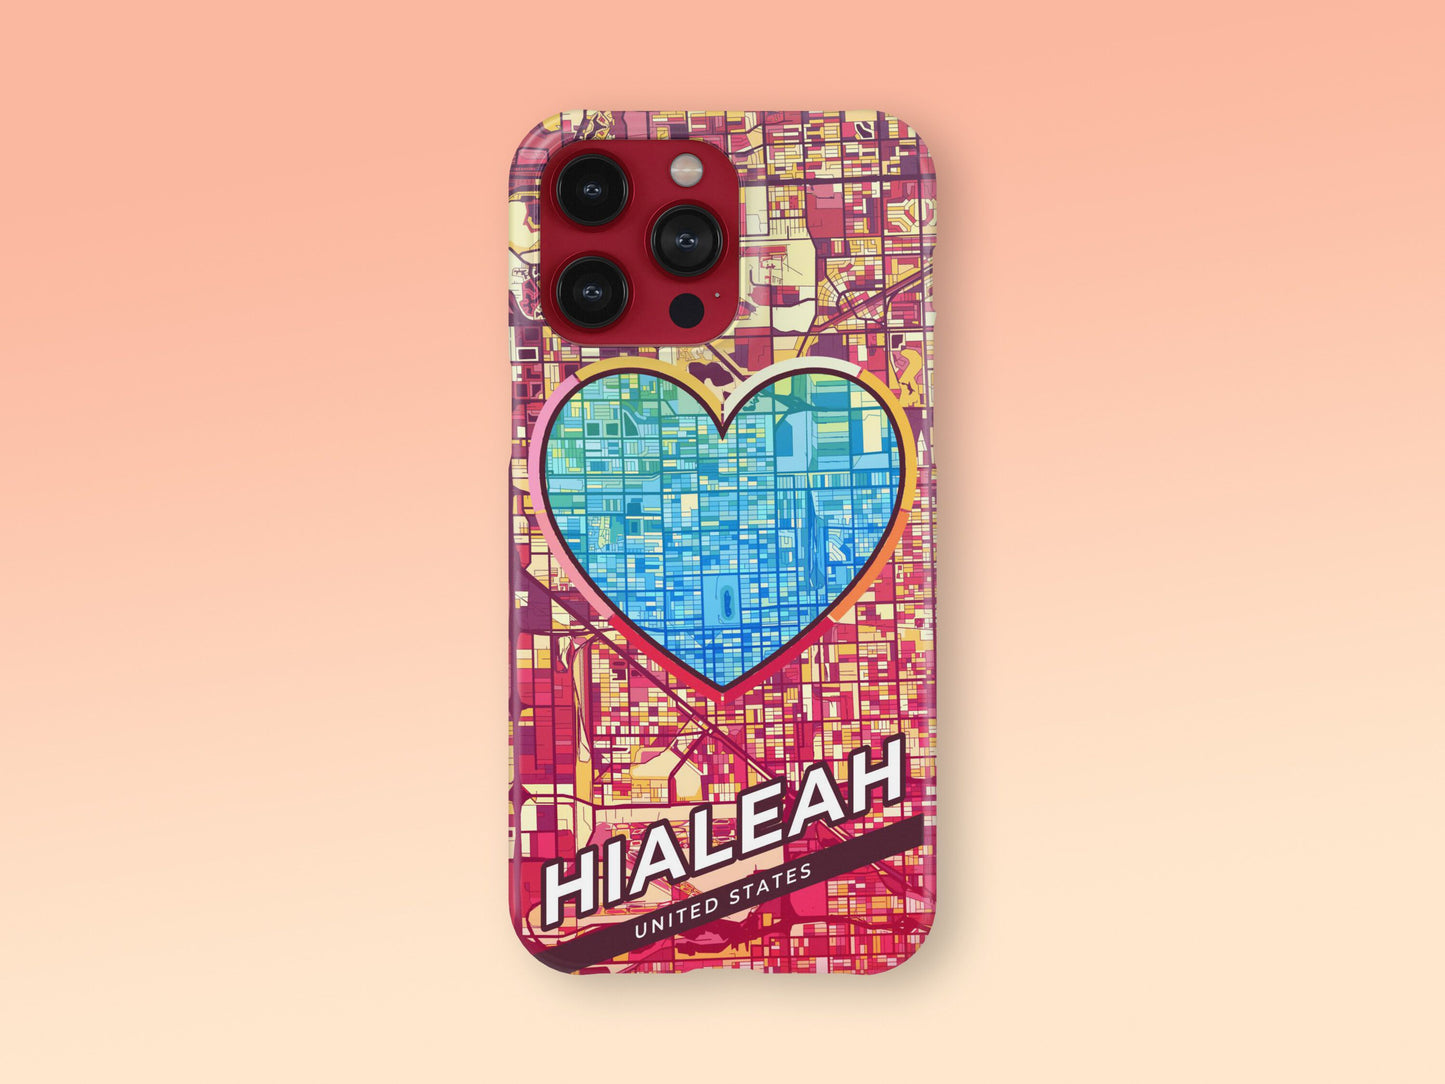 Hialeah Florida slim phone case with colorful icon. Birthday, wedding or housewarming gift. Couple match cases. 2